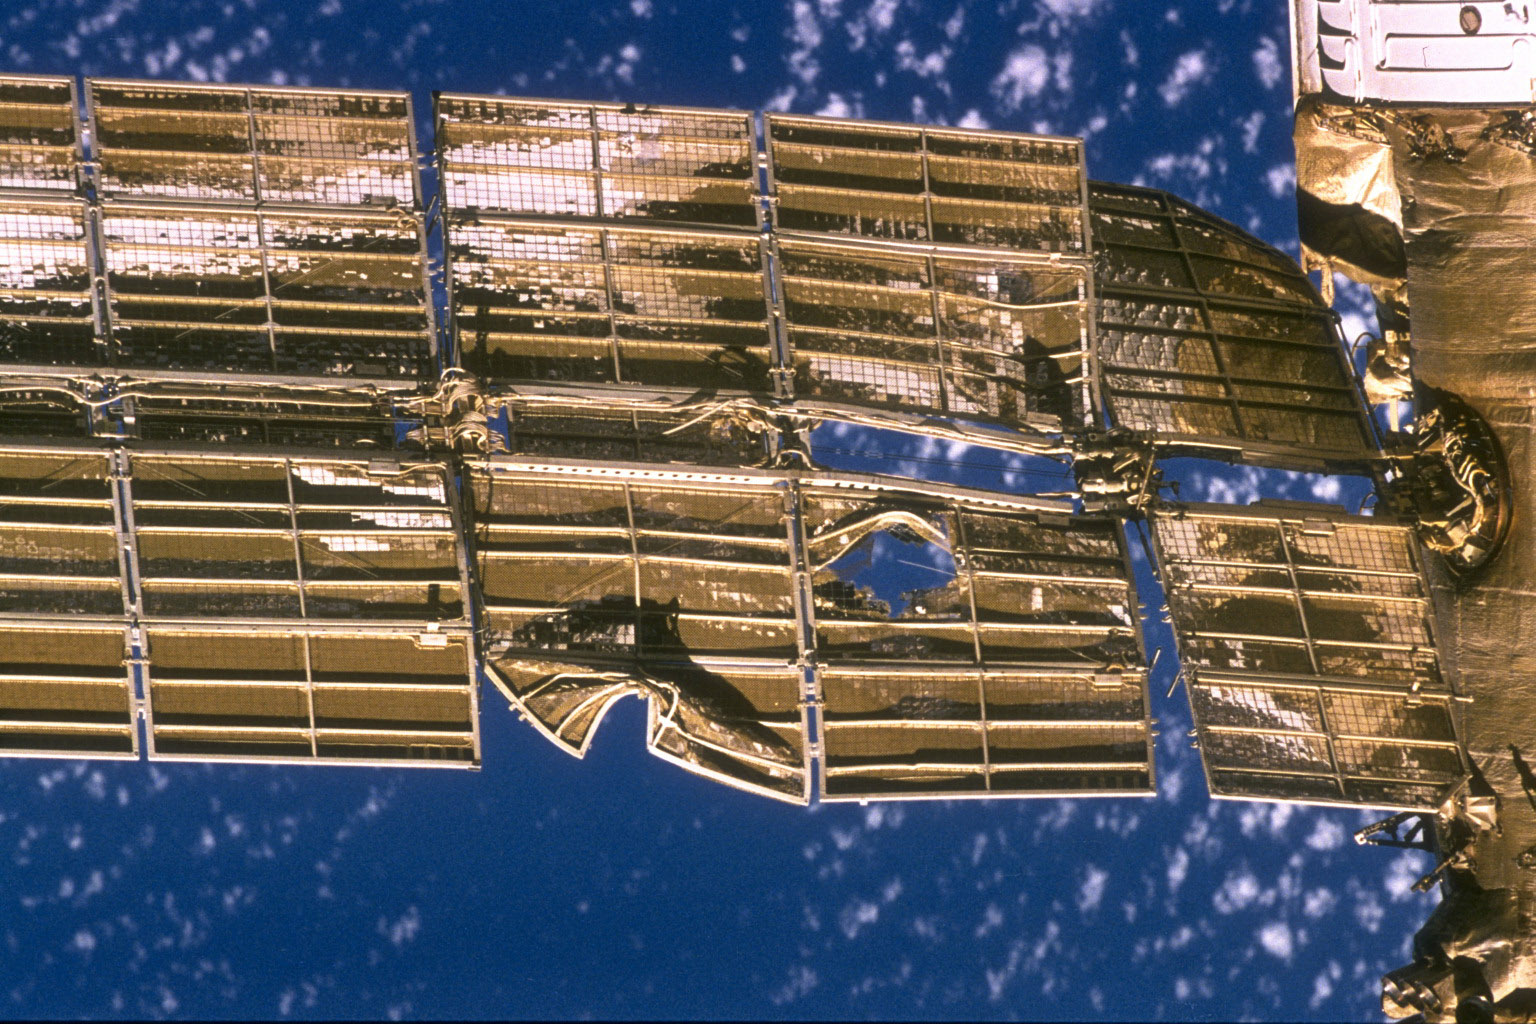 383927 13: FILE PHOTO: A close-up view of the solar array panel on Russia's Mir Space Station's Spektr Module shows damage incurred by the impact of a Russian unmanned Progress re-supply ship which collided with the space station June 25, 1997, causing Spektr to depressurize. Mir is nearing the end of its existence as Russia plans to steer the craft out of orbit in late February 2001 in a controlled crash to dump the space station safely into the Pacific Ocean. (Photo by NASA/Newsmakers)